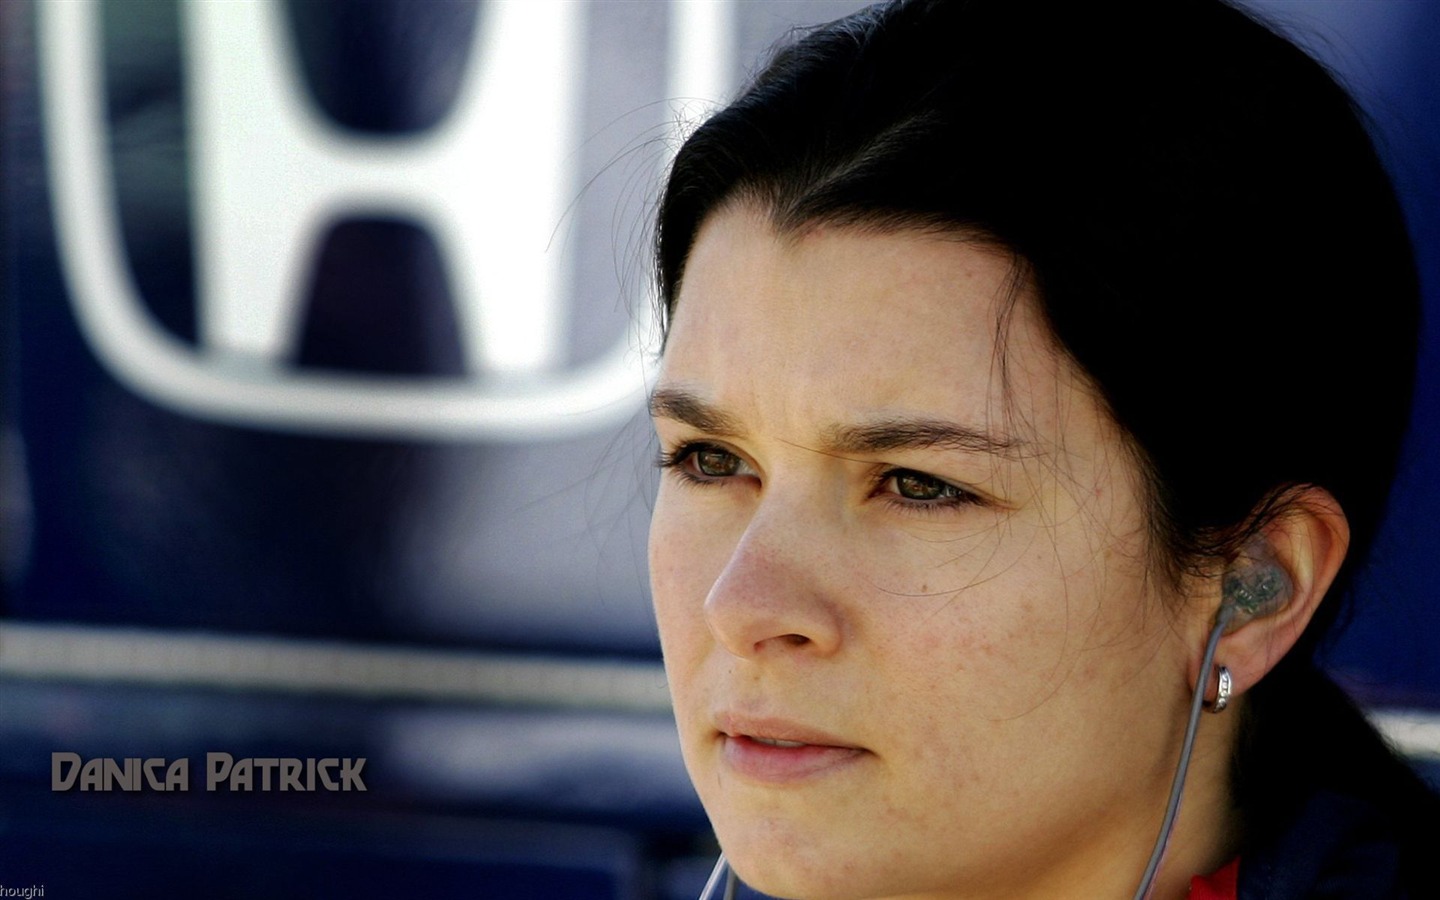 Danica Patrick #007 - 1440x900 Wallpapers Pictures Photos Images